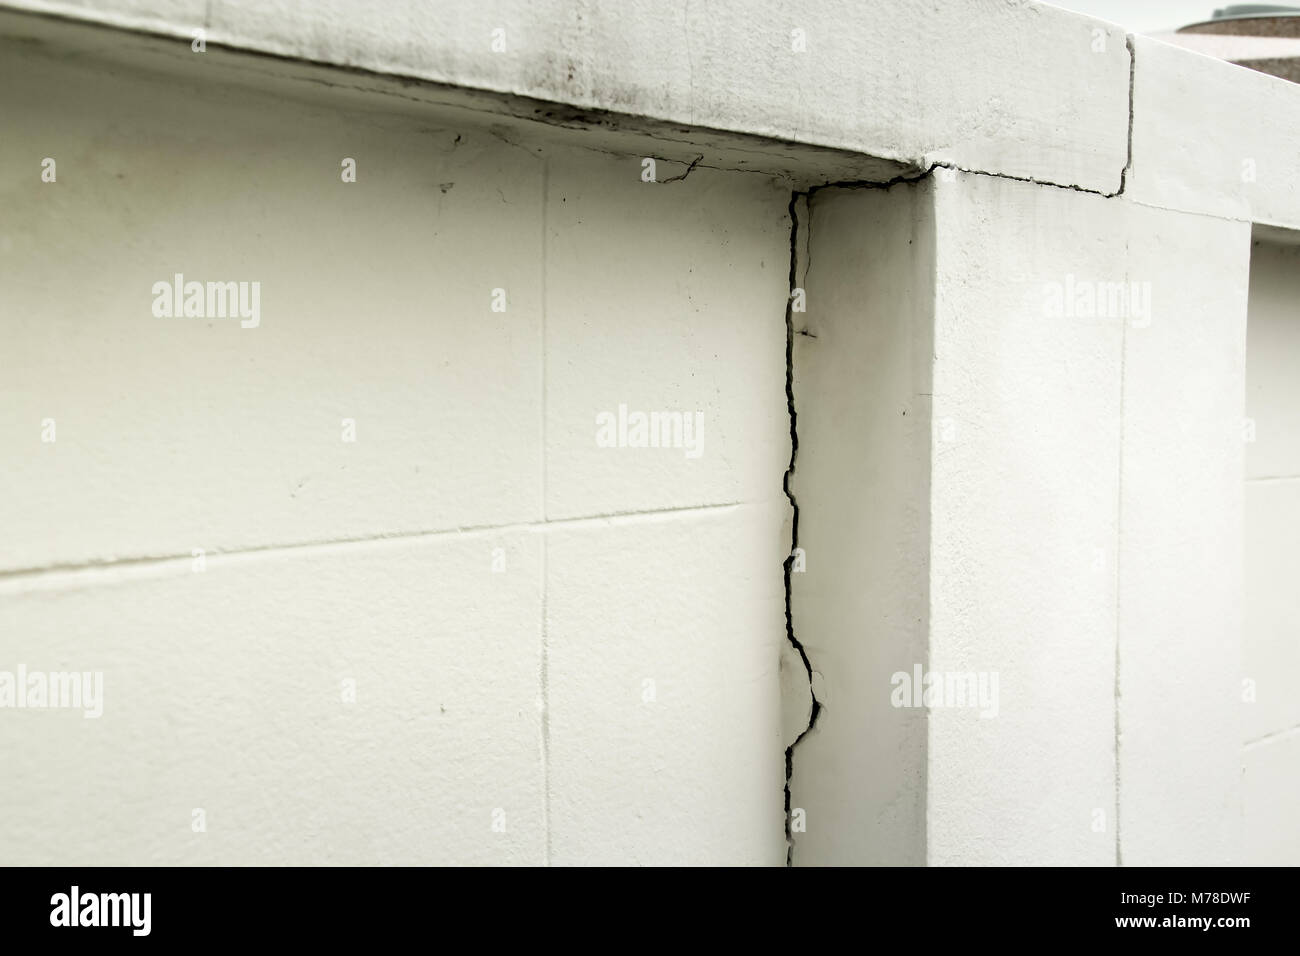 Home problem, building problem wall cracked need to repair hurry up Stock Photo